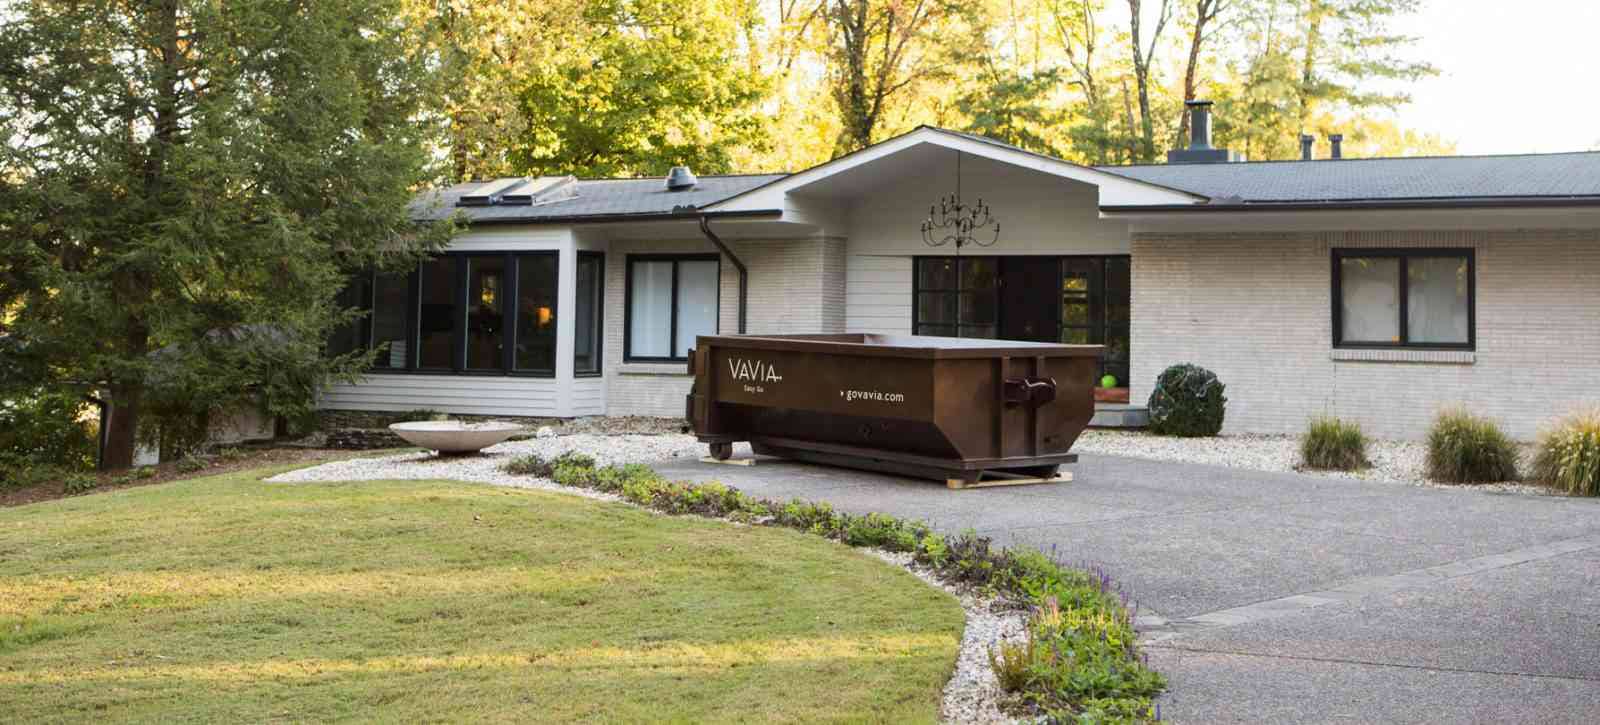 Dumpster Rental Services in Chattanooga, TN | Vavia